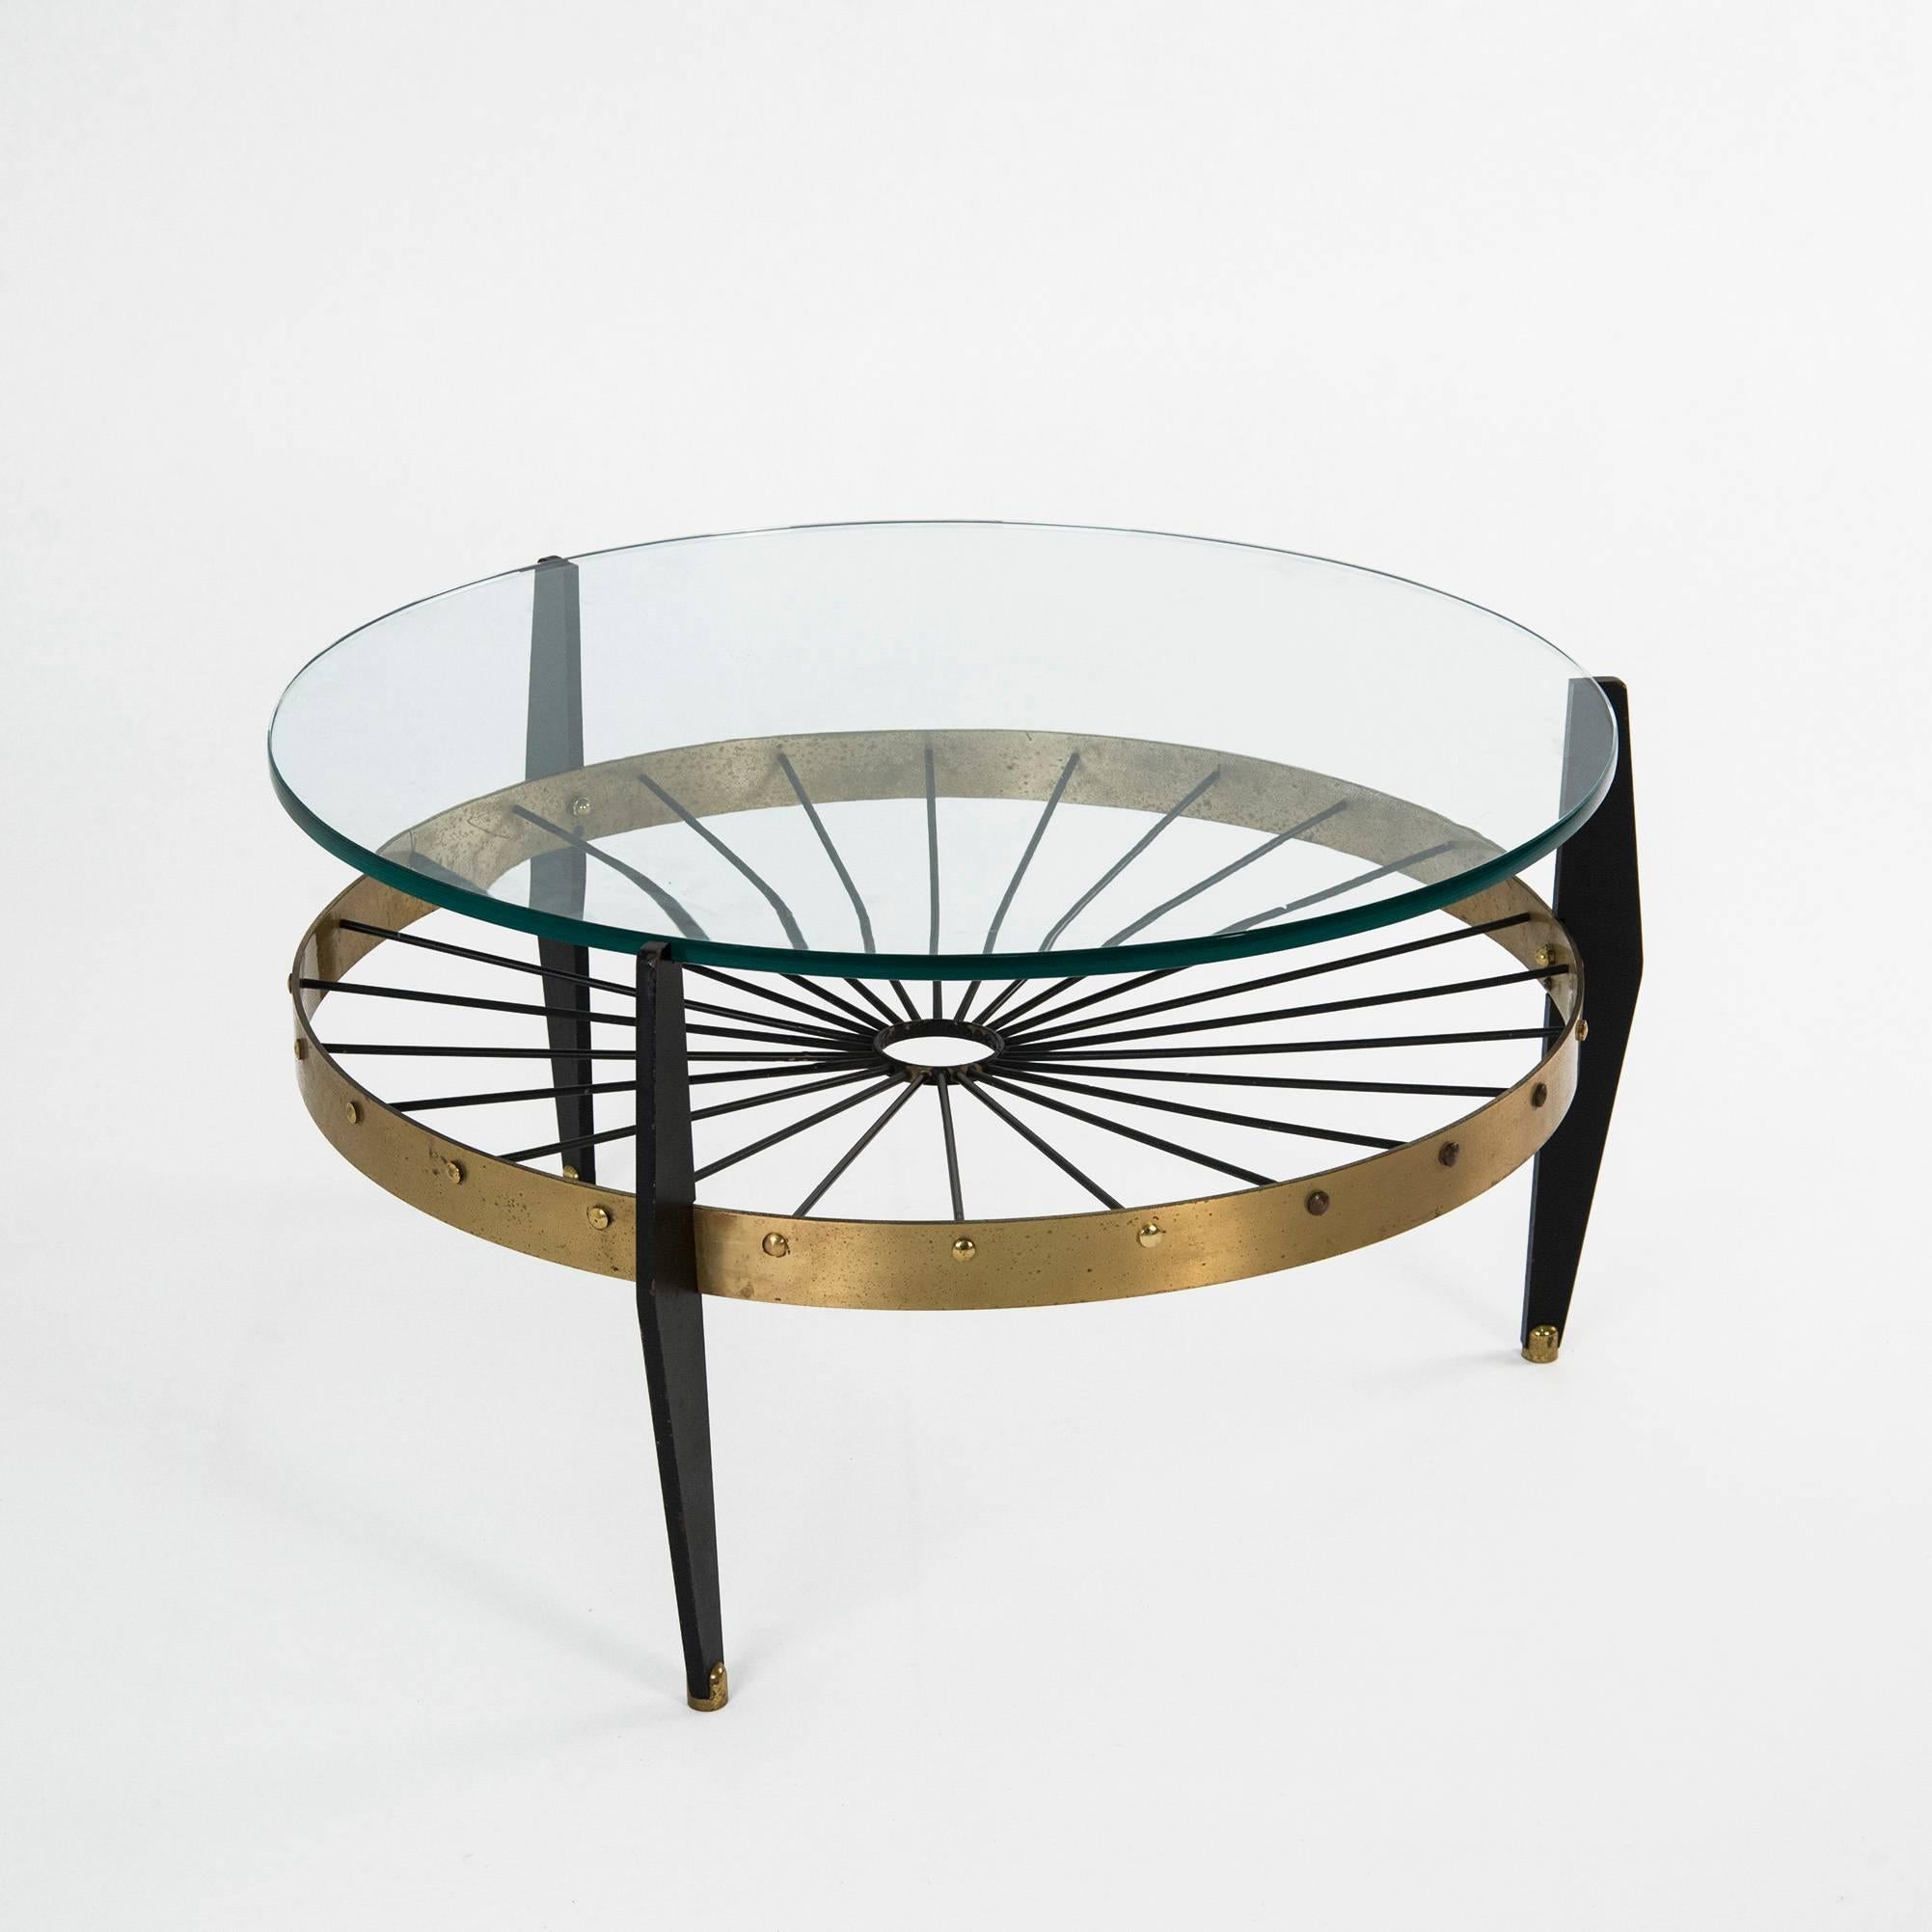 Astonishing low table manufactured in Italy in the 1950s. Black lacquered metal legs, brass circular structure, thick glass top. Good original vintage conditions.